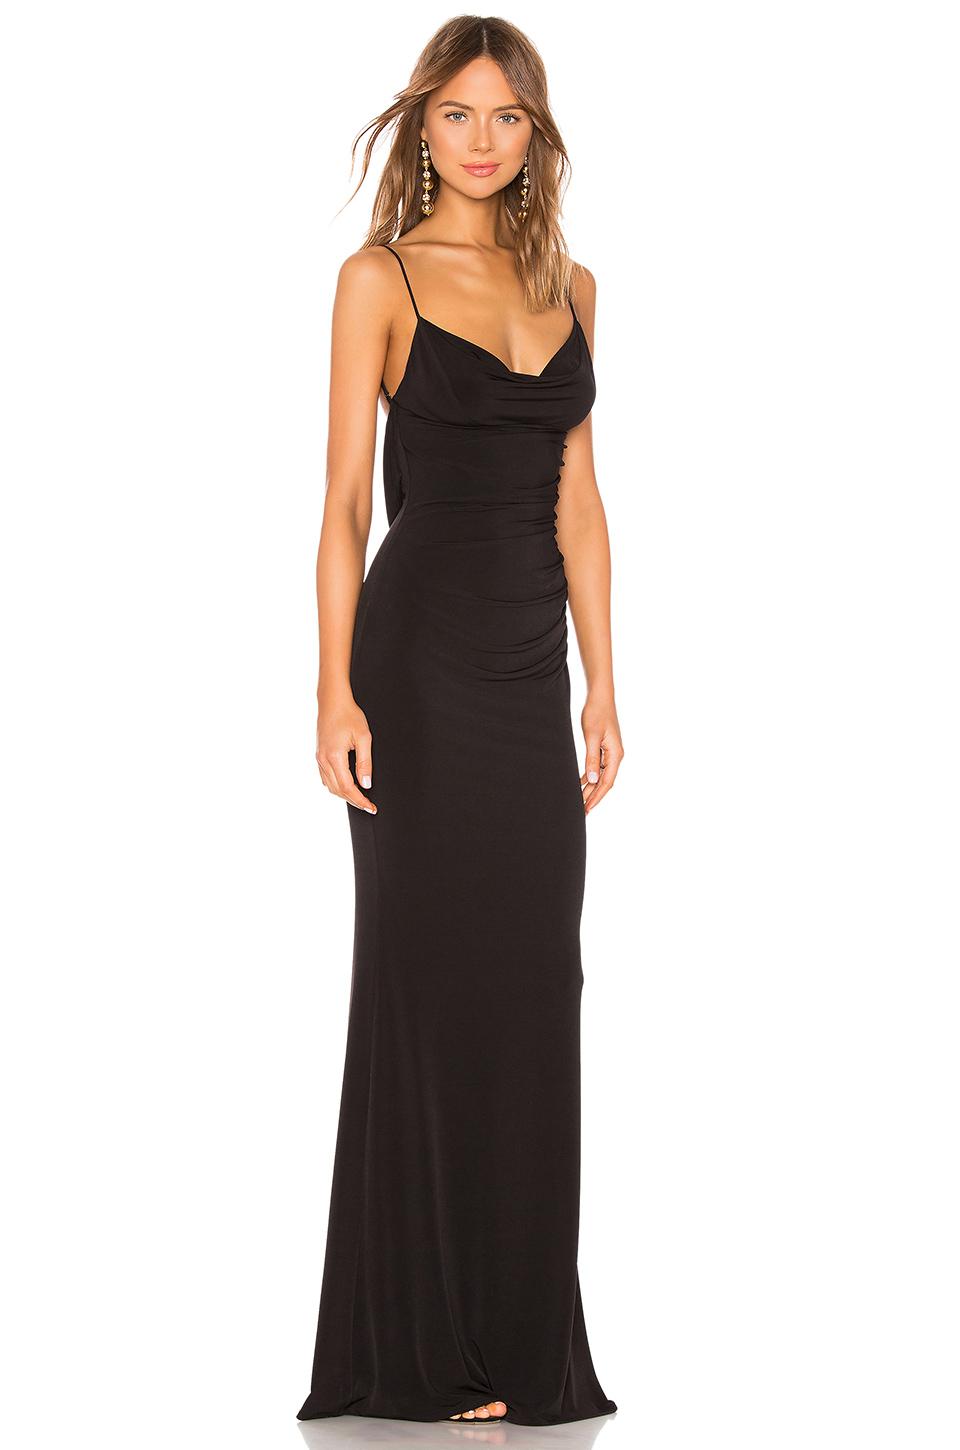 Katie May Synthetic Surreal Gown in Black - Lyst